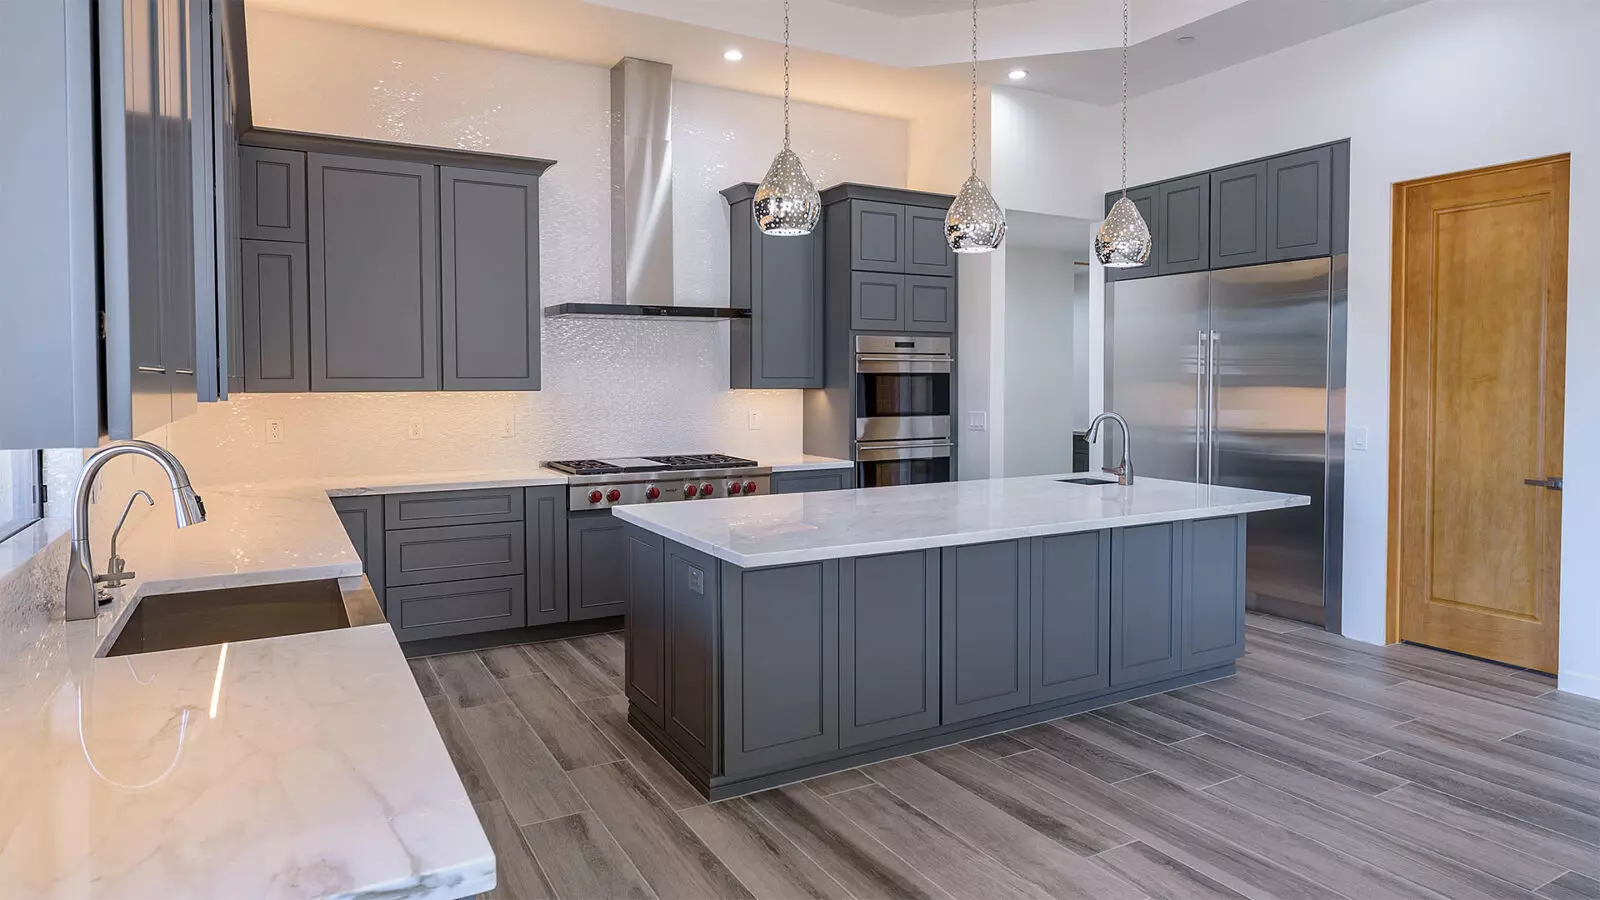 A grey-painted kitchen